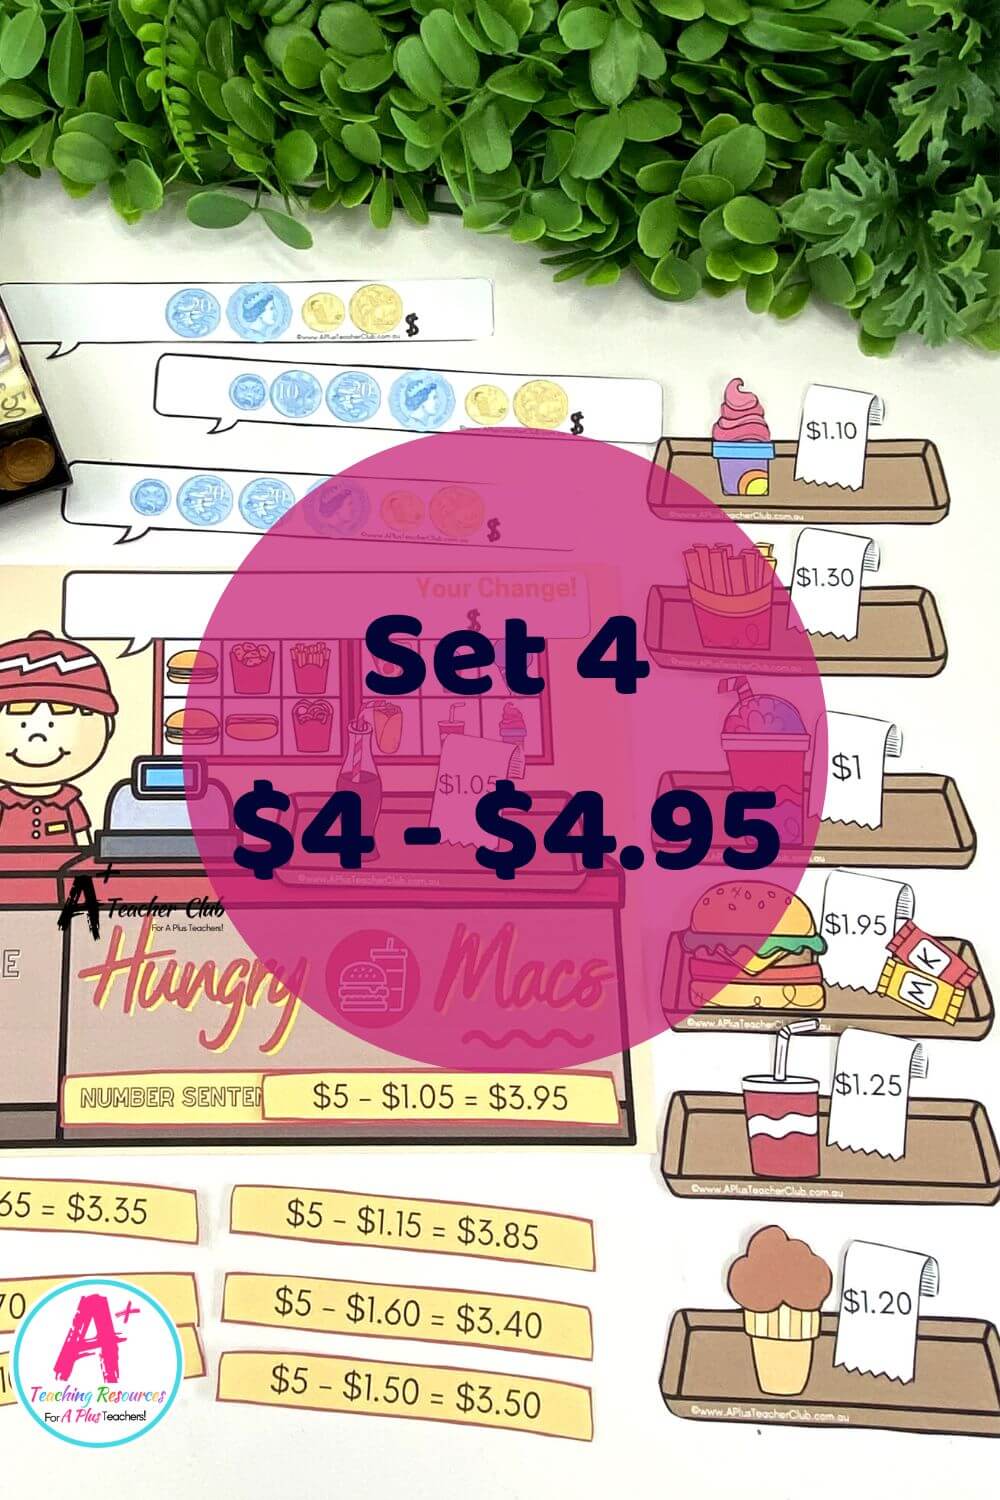 Counting Change Games - Fast Food Set 4 ($4-$4.95)